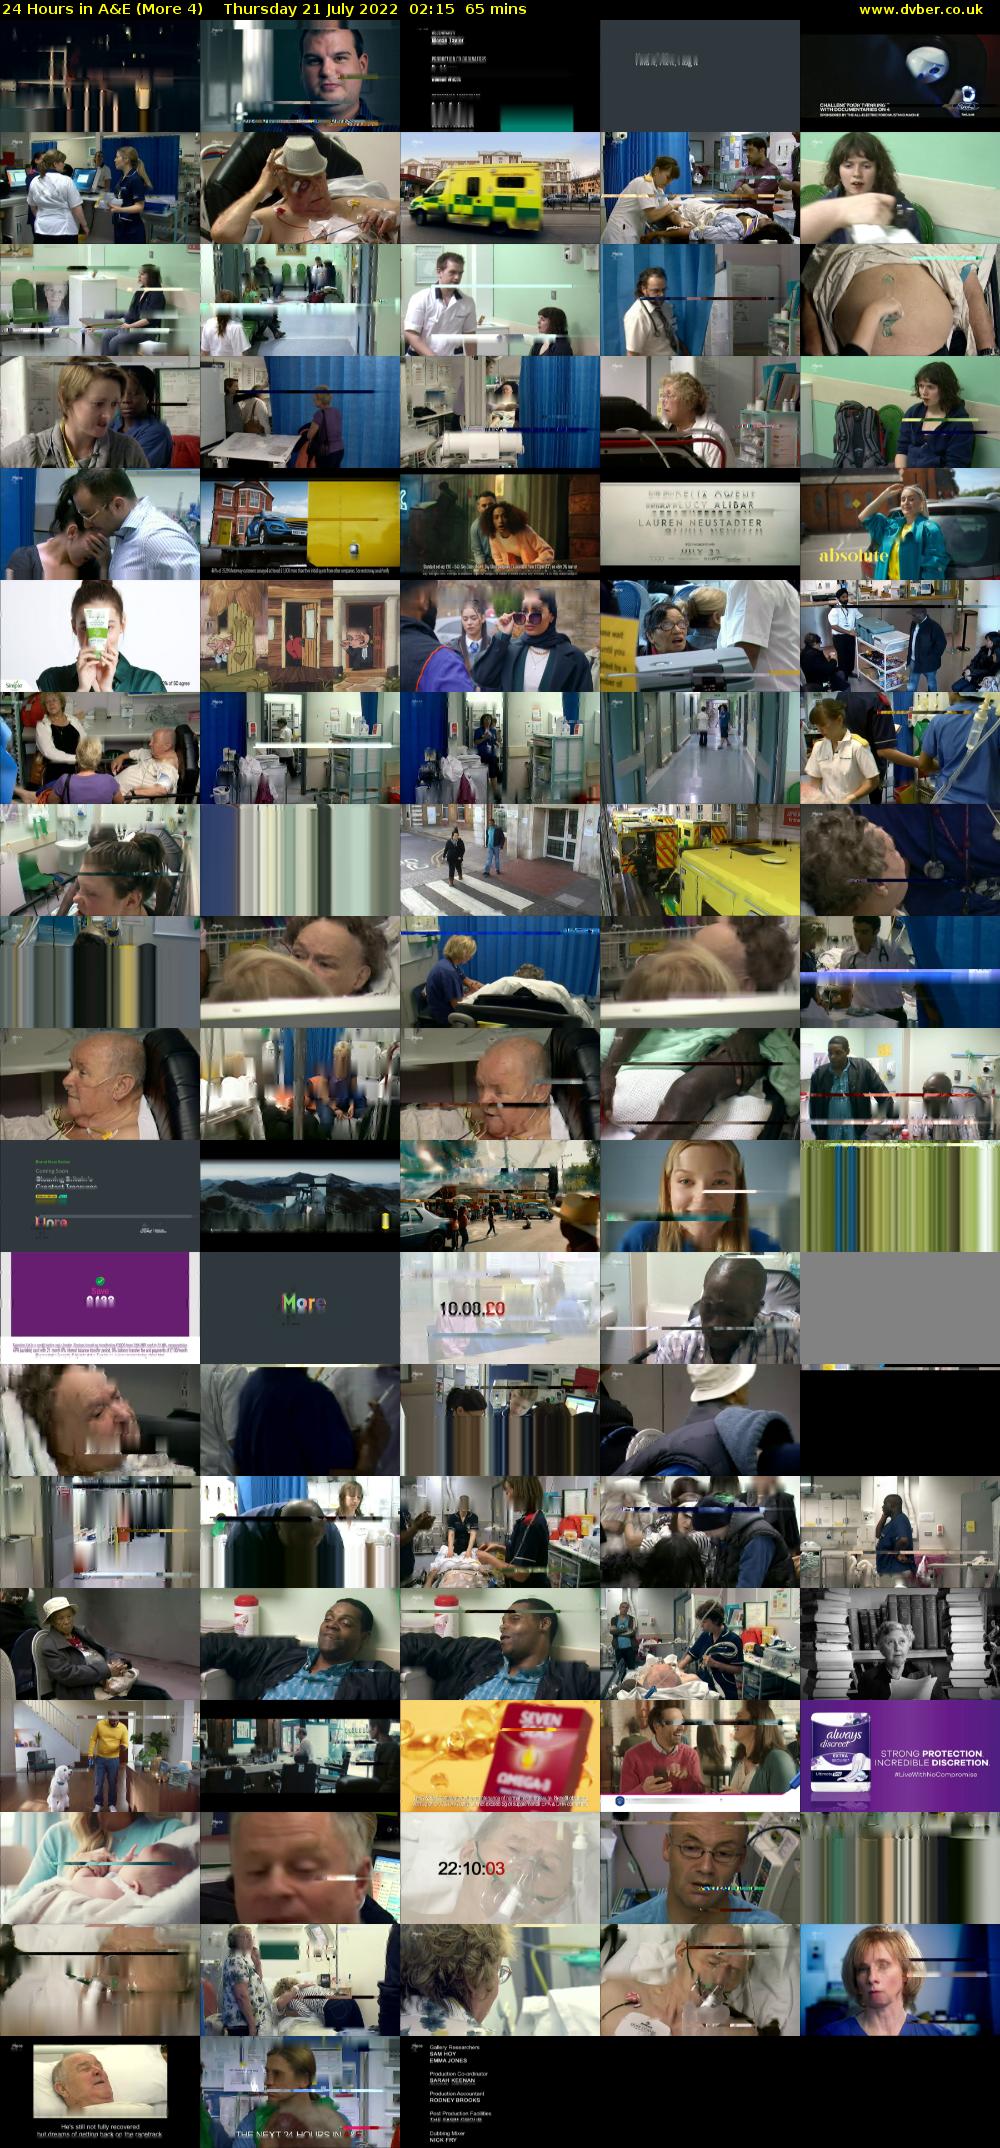 24 Hours in A&E (More 4) Thursday 21 July 2022 02:15 - 03:20